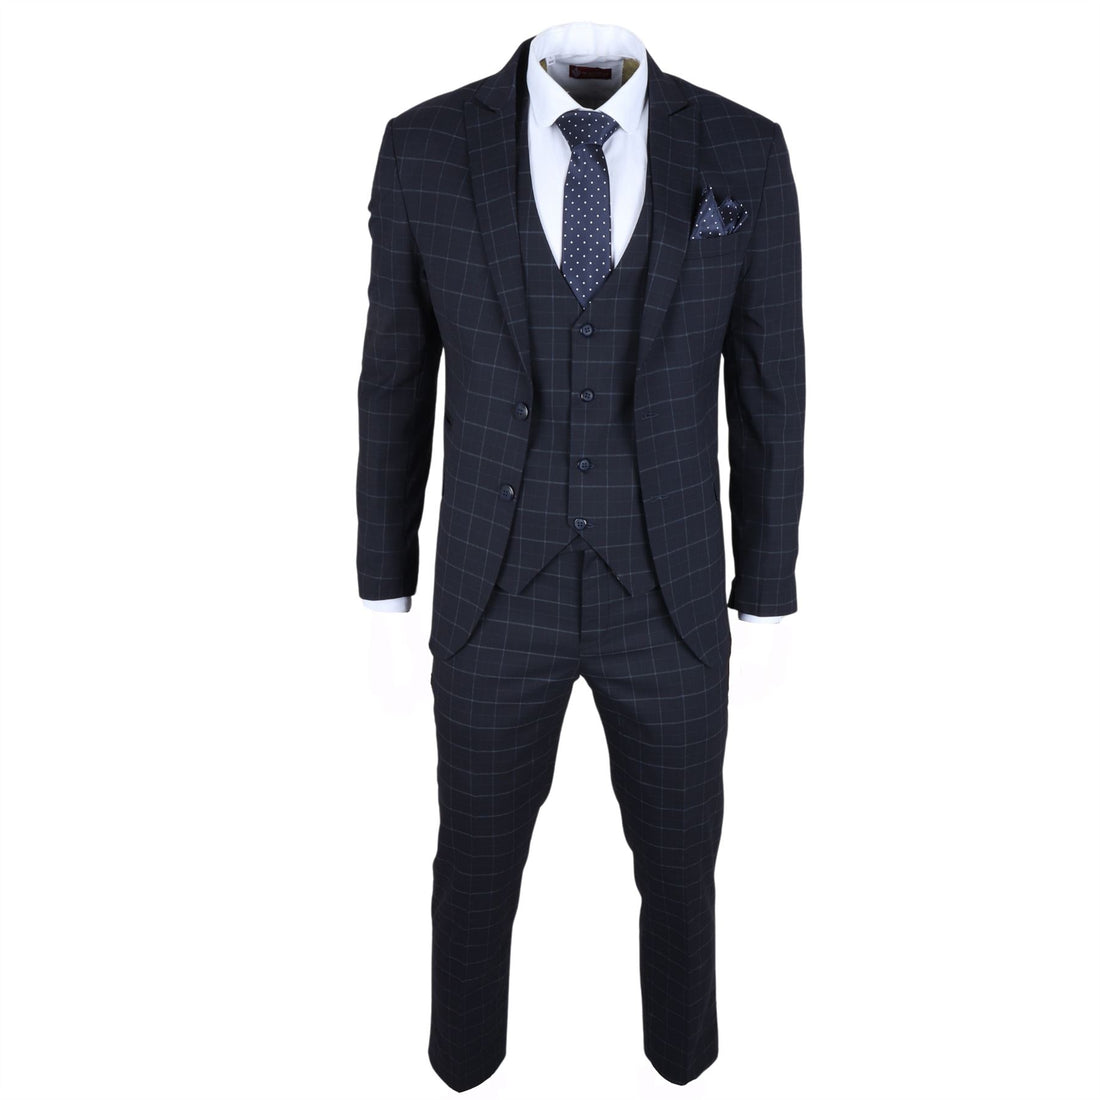 Men's Suit Navy Blue Checked Tailored Fit 3 Piece Formal Dress